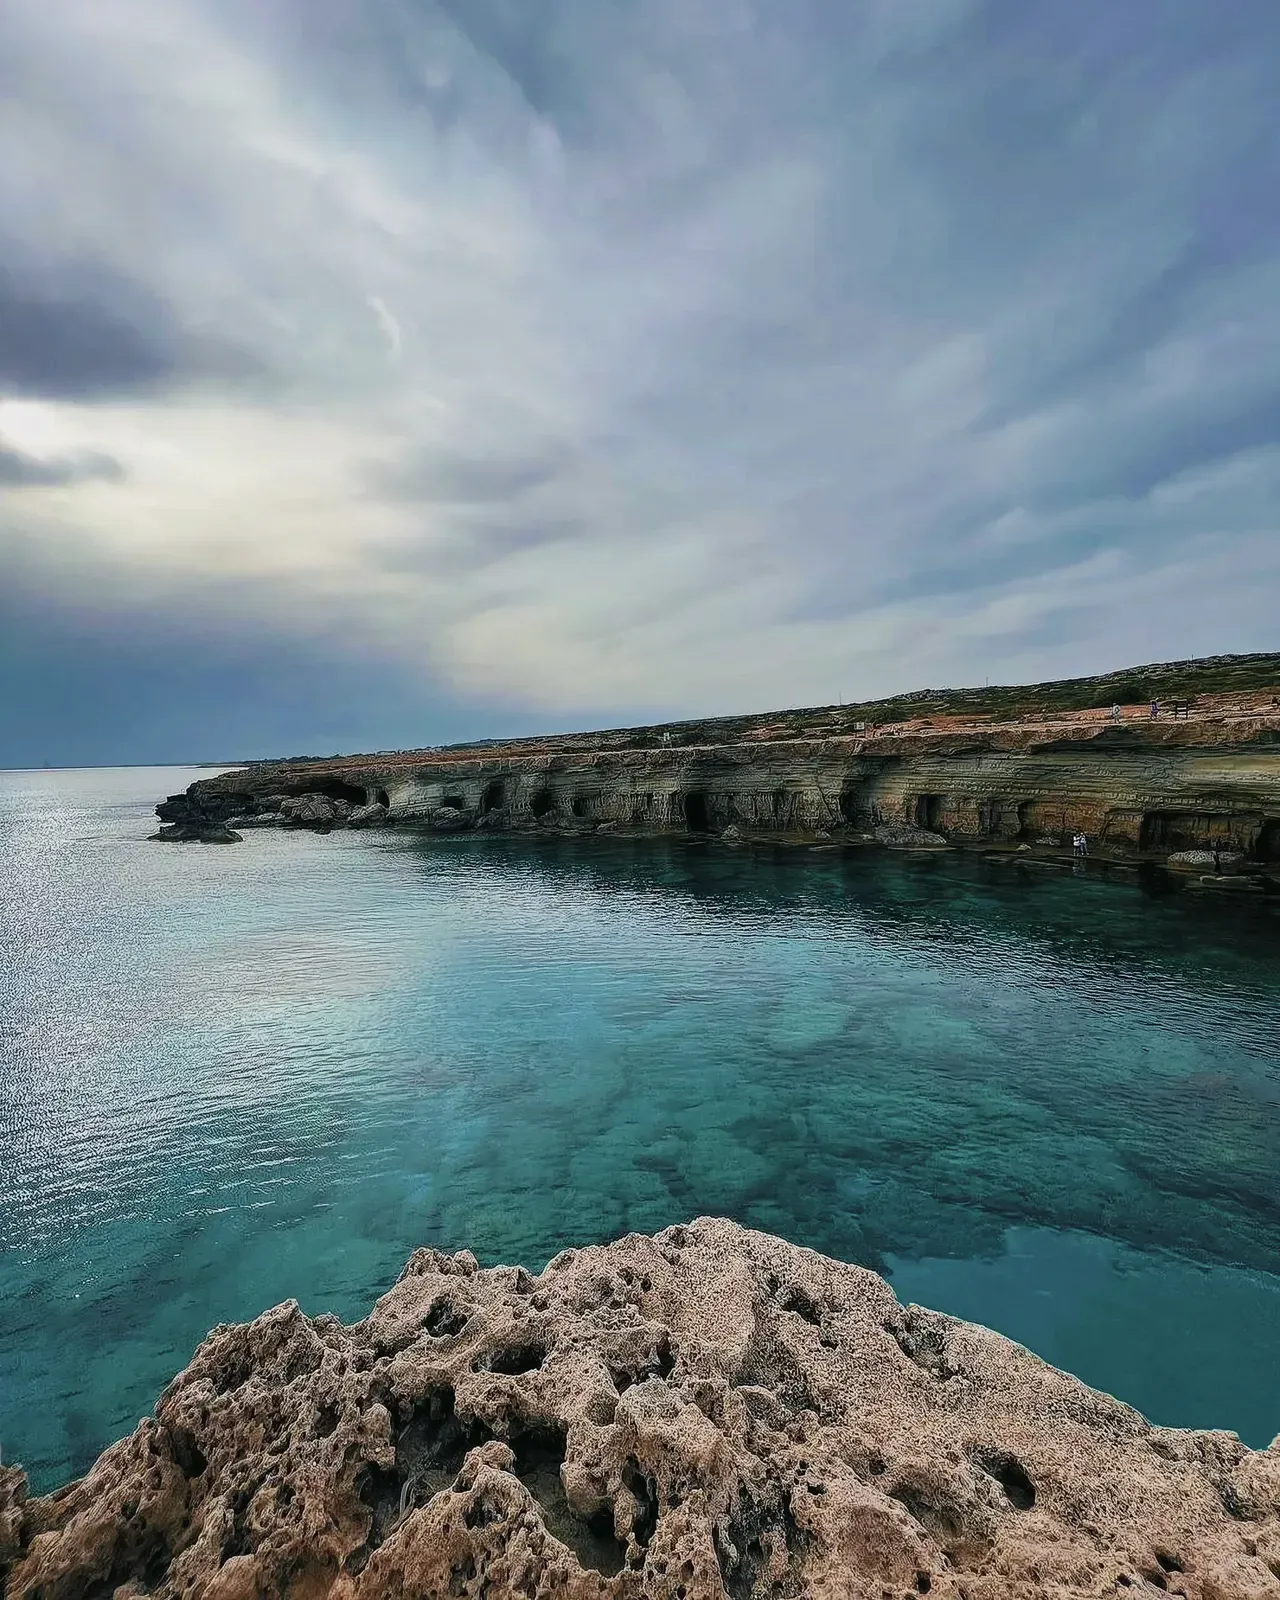 Rugged cliffside and tranquil water at Cape Greco National Park